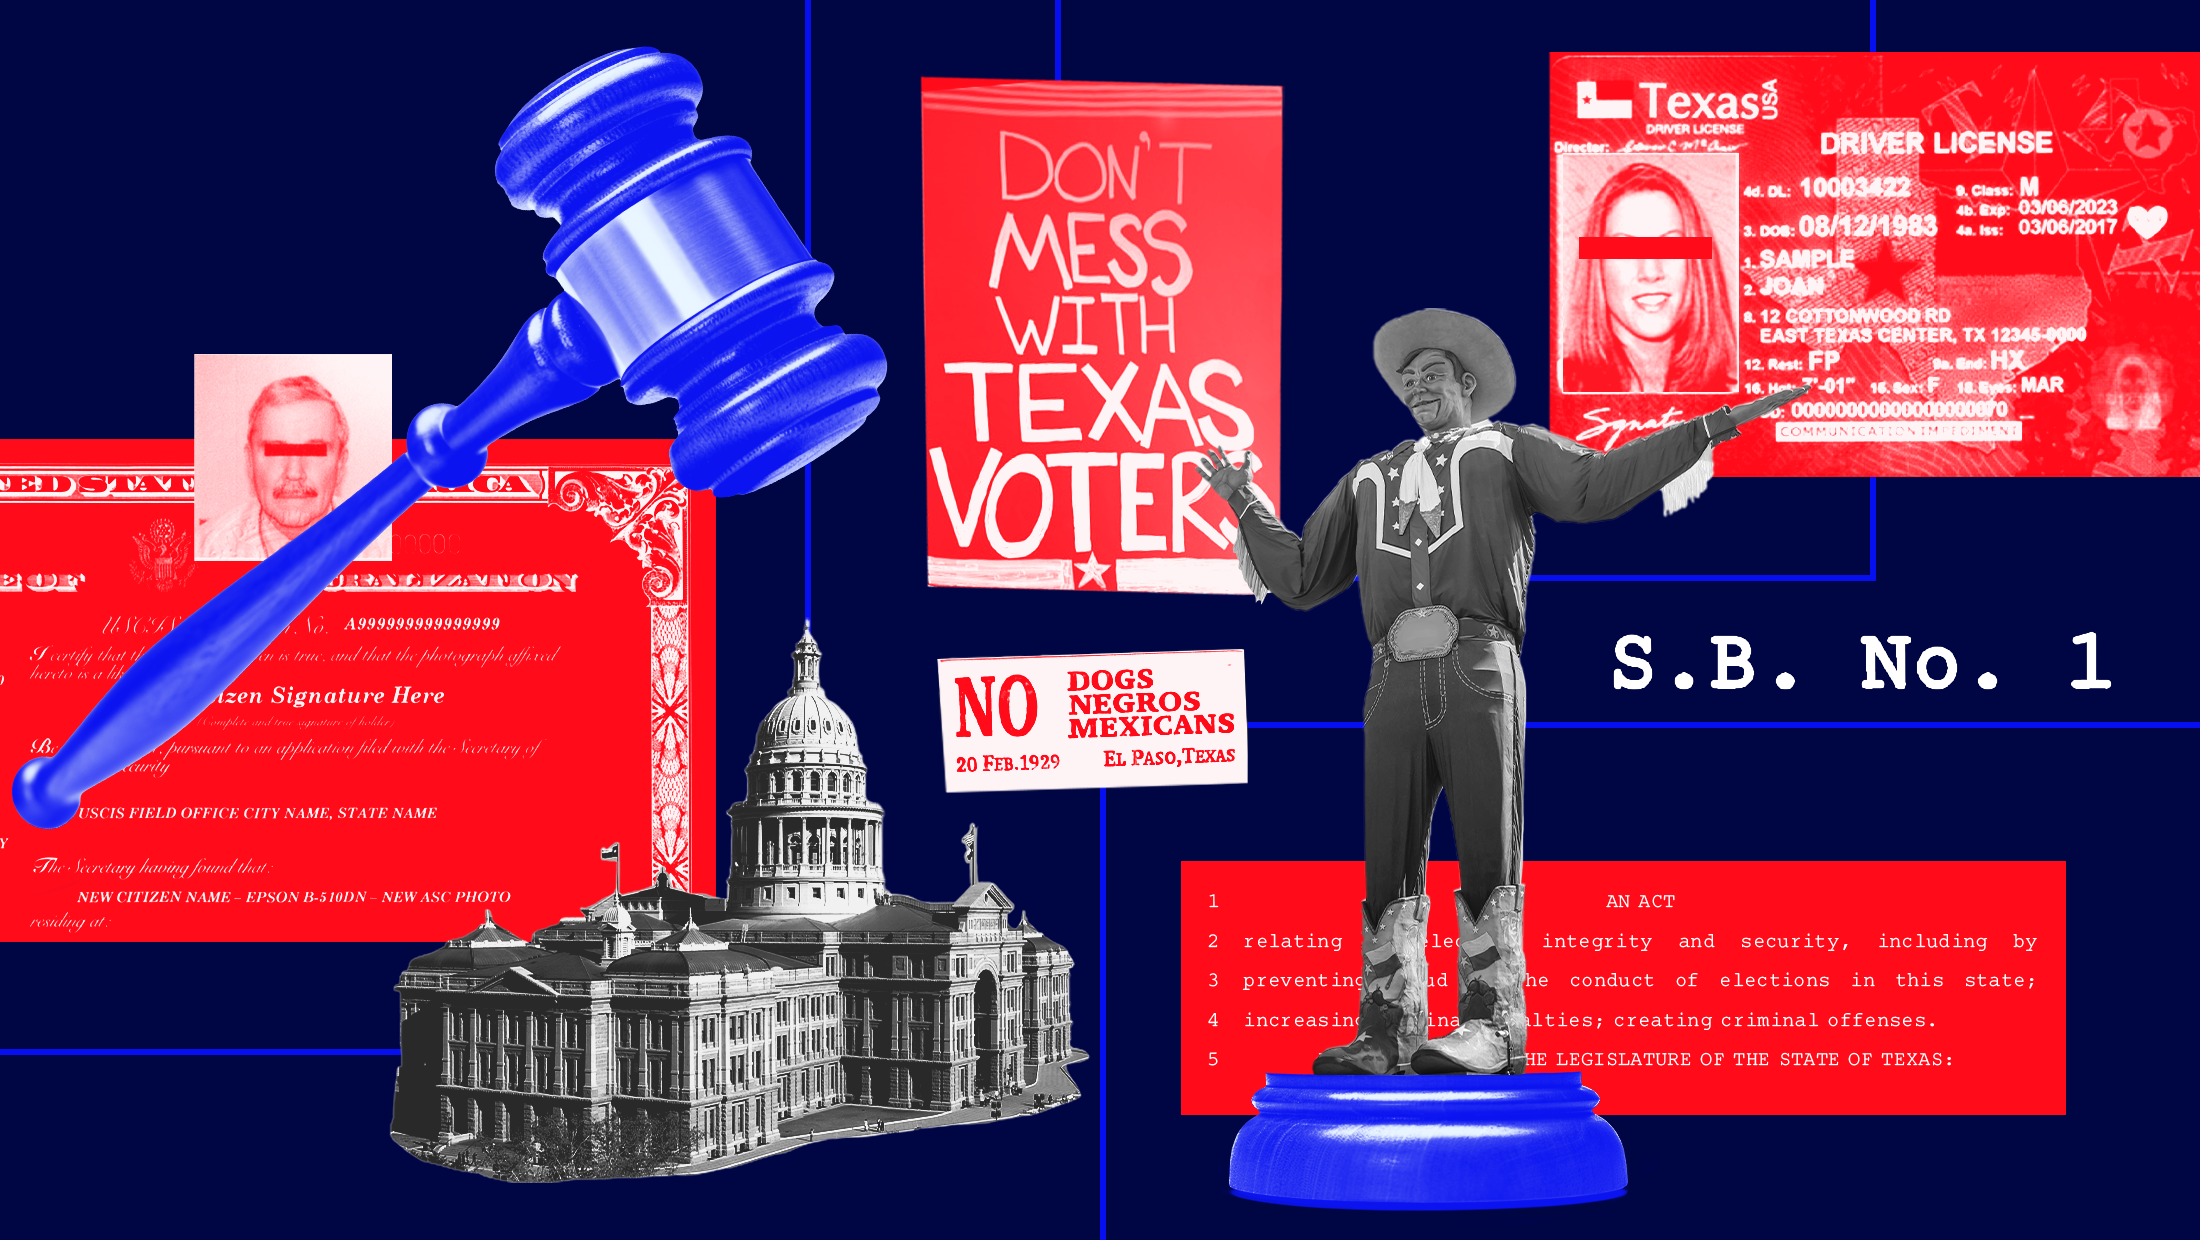 A collage of images related to Texas voters suppression law Senate Bill 1 overlaying a navy blue background. The images in the collage feature a gray gavel, the Texas State Capitol building, a Texas cowboy statue of “Big Tex'' atop a pedestal, a red image of S.B. 1’s bill text, a red protest sign that reads “DON’T MESS WITH TEXAS VOTERS,” a picture of a Texas driver’s license and more. The images are connected by bright blue lines.